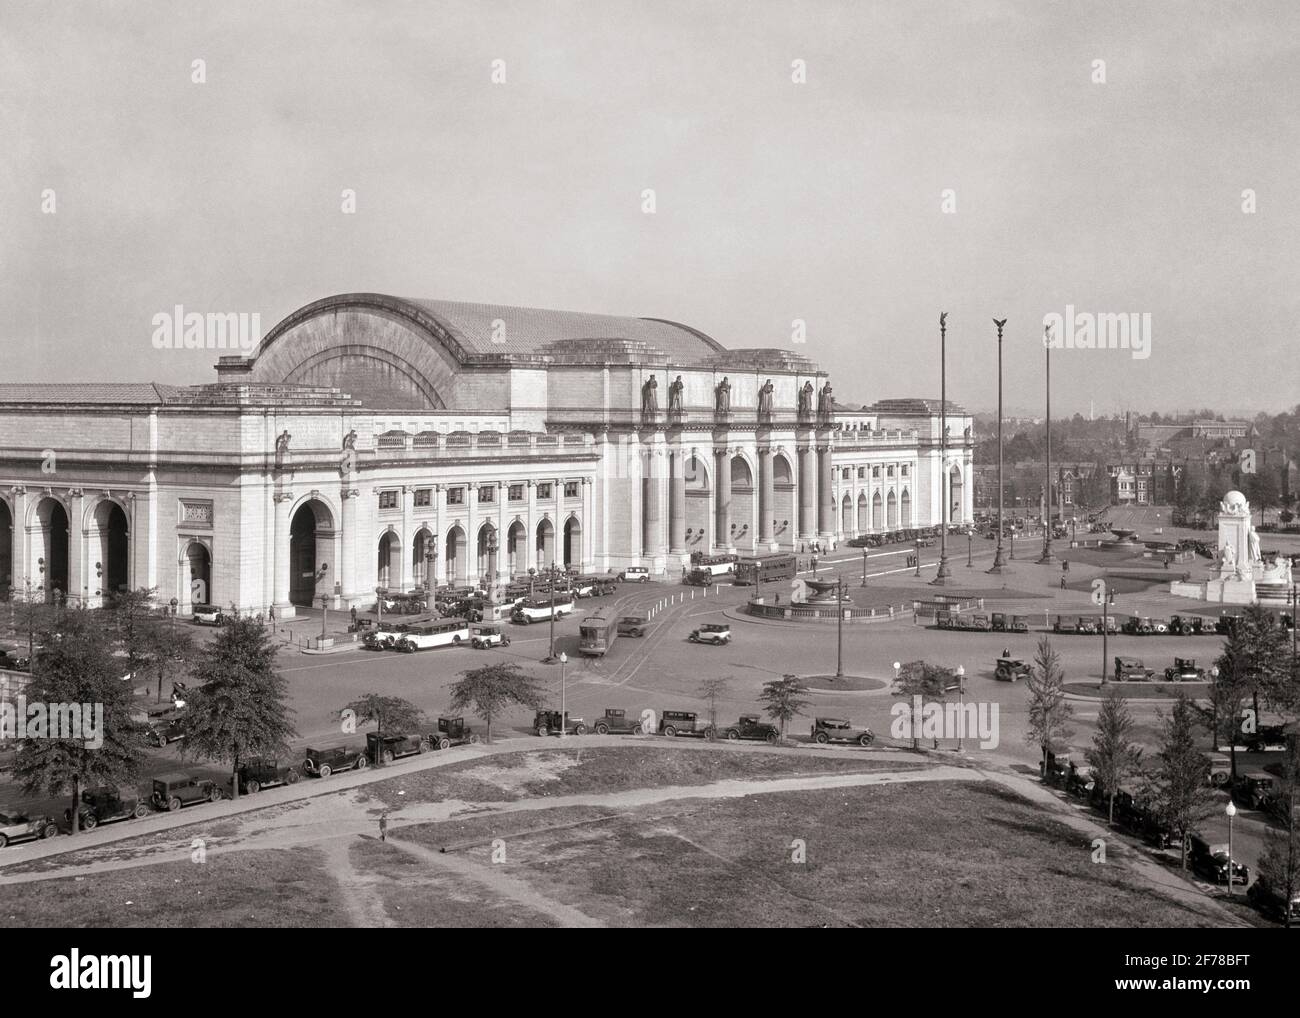 1930s 1940s UNION STATION WASHINGTON DC USA - q41663 CPC001 HARS COPY SPACE LADIES PERSONS AUTOMOBILE MALES BUILDINGS PEDESTRIANS ENTERTAINMENT TRANSPORTATION B&W RAIL STRUCTURE HIGH ANGLE LEISURE PROPERTY UNION AND AUTOS DISTRICT OF COLUMBIA EXTERIOR SOUTHERN TROLLEY CAPITAL REAL ESTATE CONNECTION STRUCTURES AUTOMOBILES CITIES VEHICLES EDIFICE FACILITY RAILROADS 1907 DESTINATION HUB INTERMODAL UNION STATION BLACK AND WHITE OLD FASHIONED STREETCAR Stock Photo